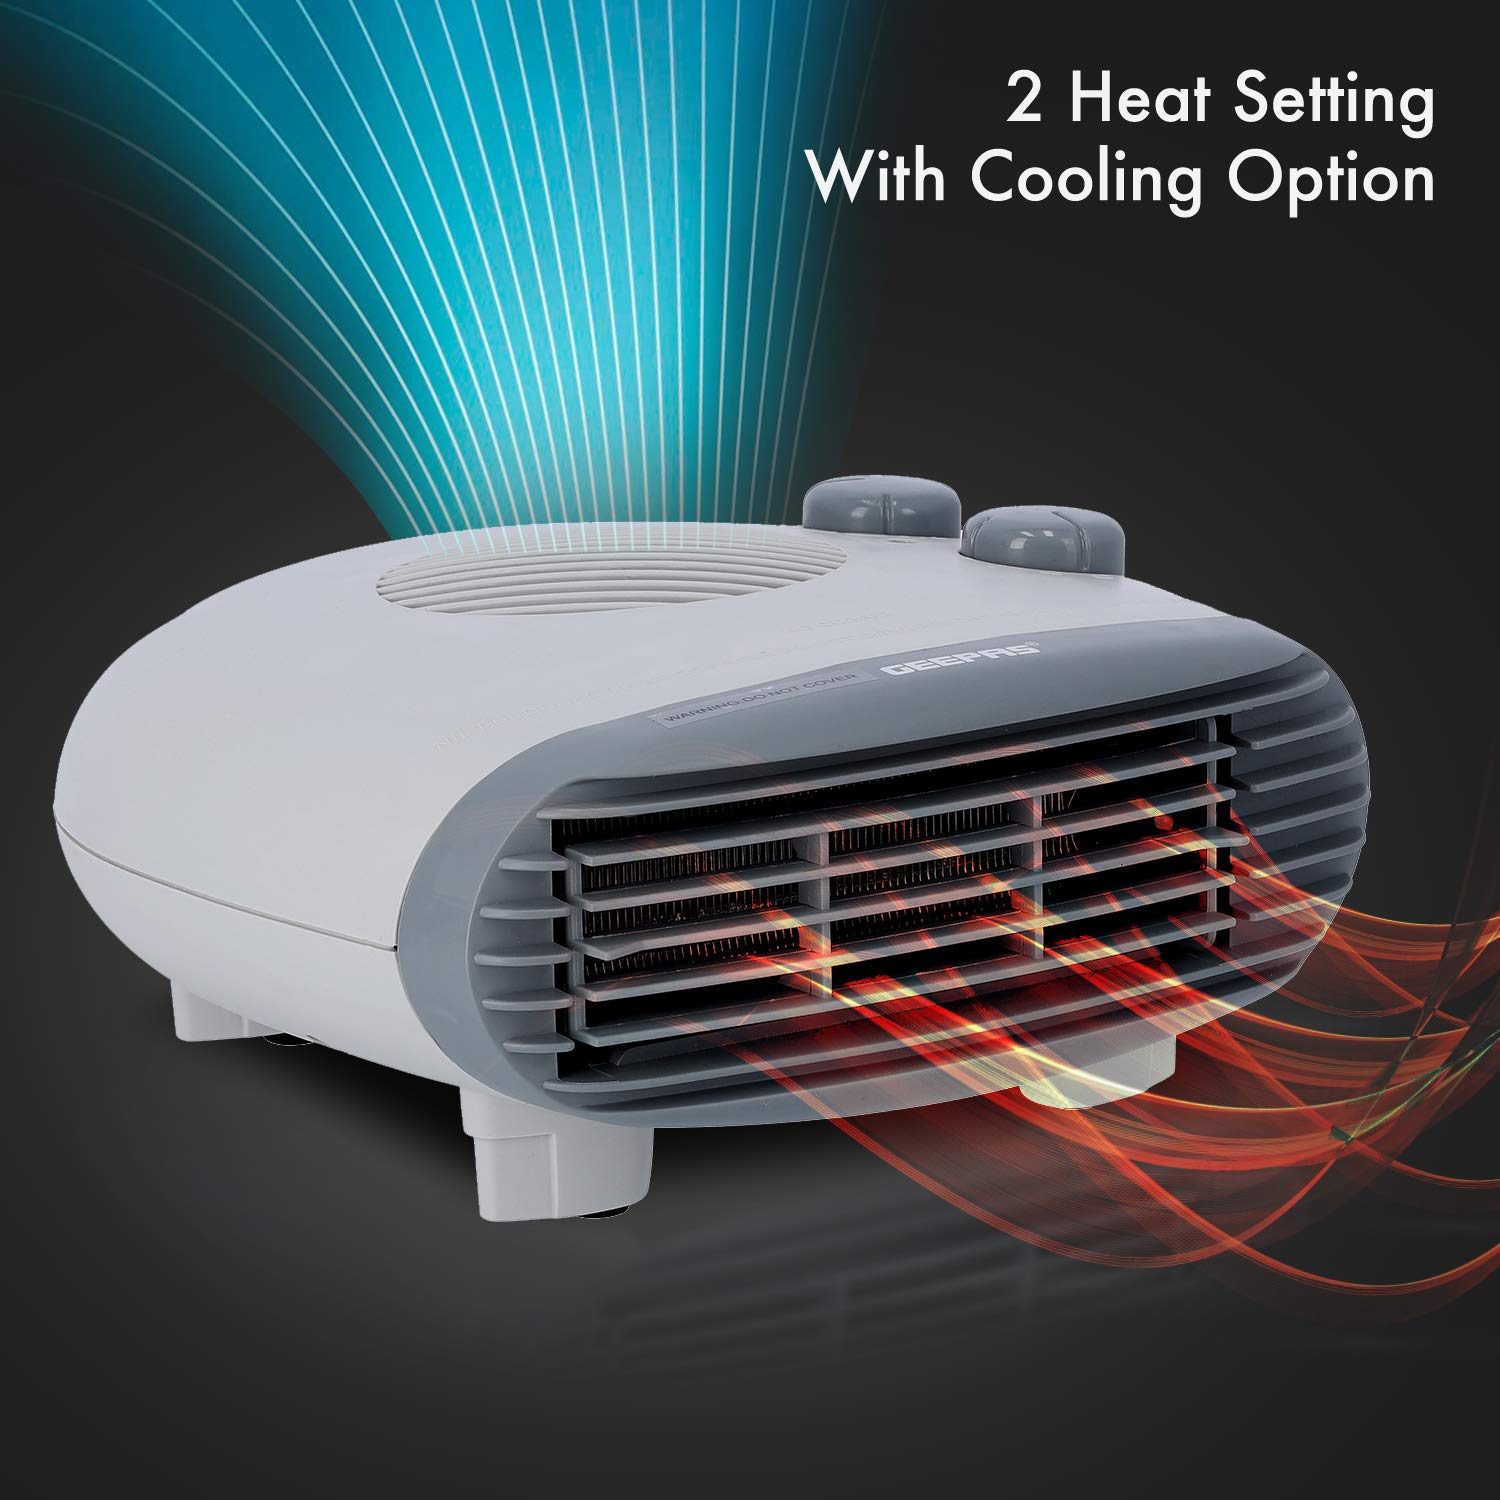 Geepas Portable Flat Fan Heater – Upright or Flatbed, Adjustable Thermostat with 2 Heat Settings 1000-2000W & Overheat Protection - Lightweight Heater with Cool, Warm & Hot Wind – 1 Years Warranty